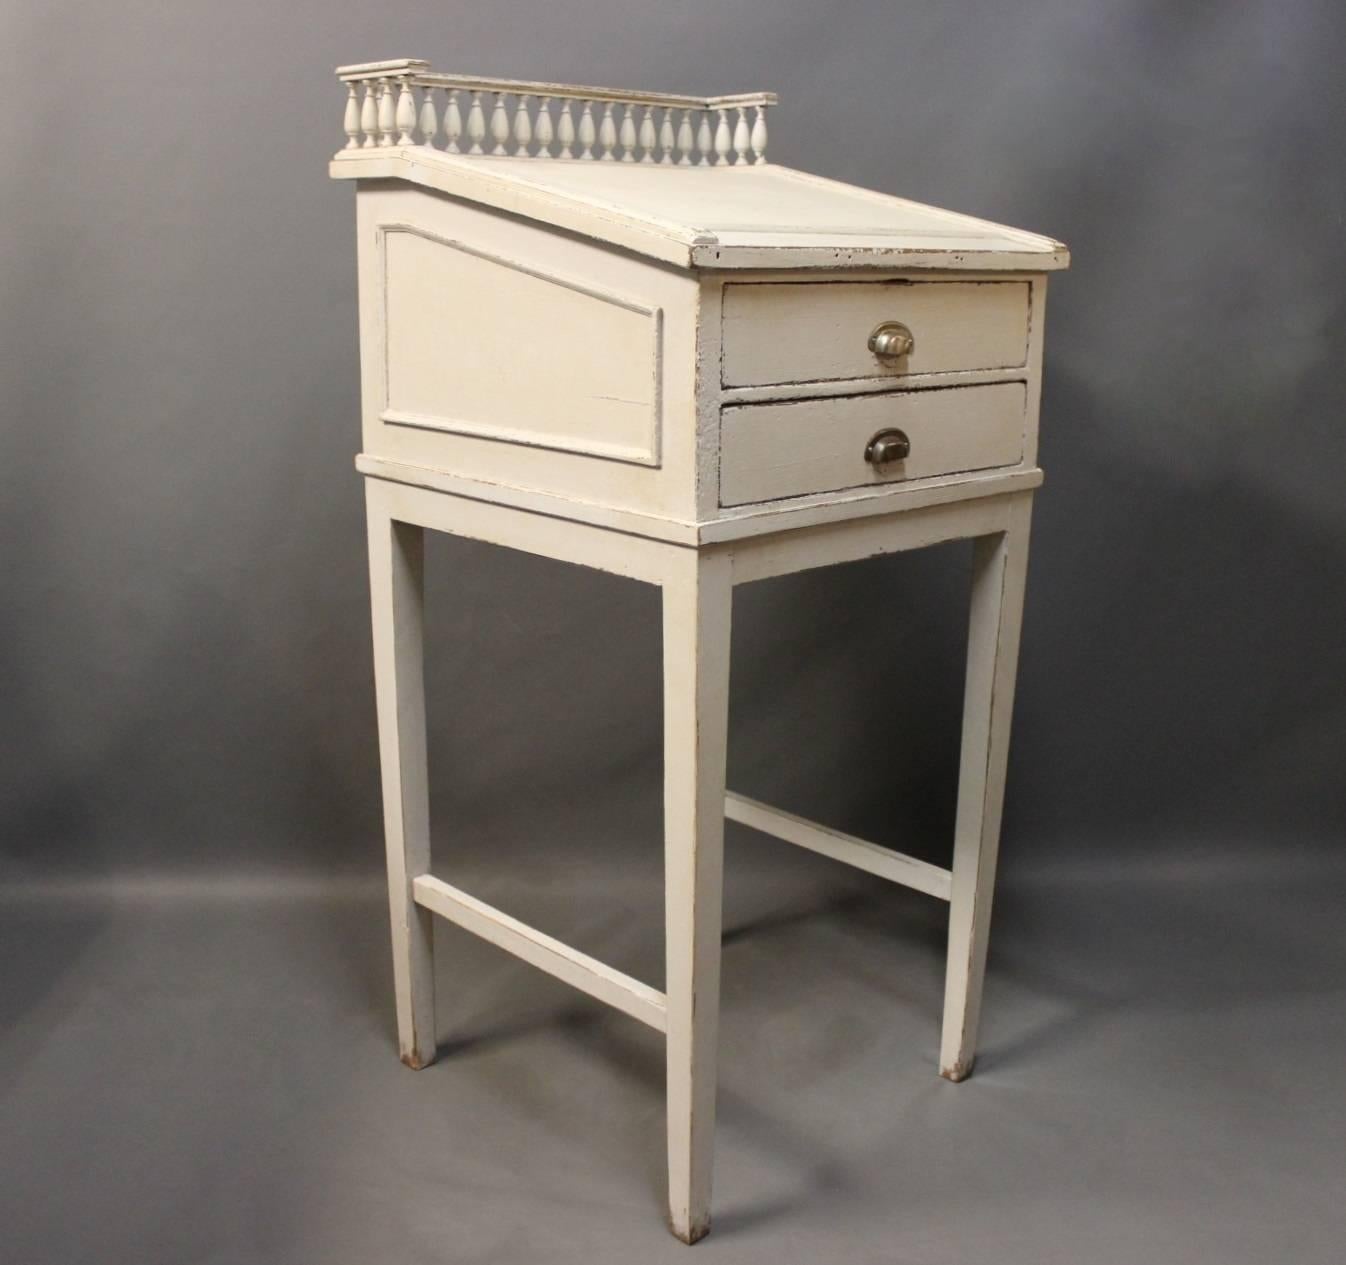 A grey painted writing desk in the Gustavian style from the 1840s is a captivating piece that reflects the aesthetics and craftsmanship of its time.

The Gustavian style originated in Sweden during the late 18th century and is characterized by its